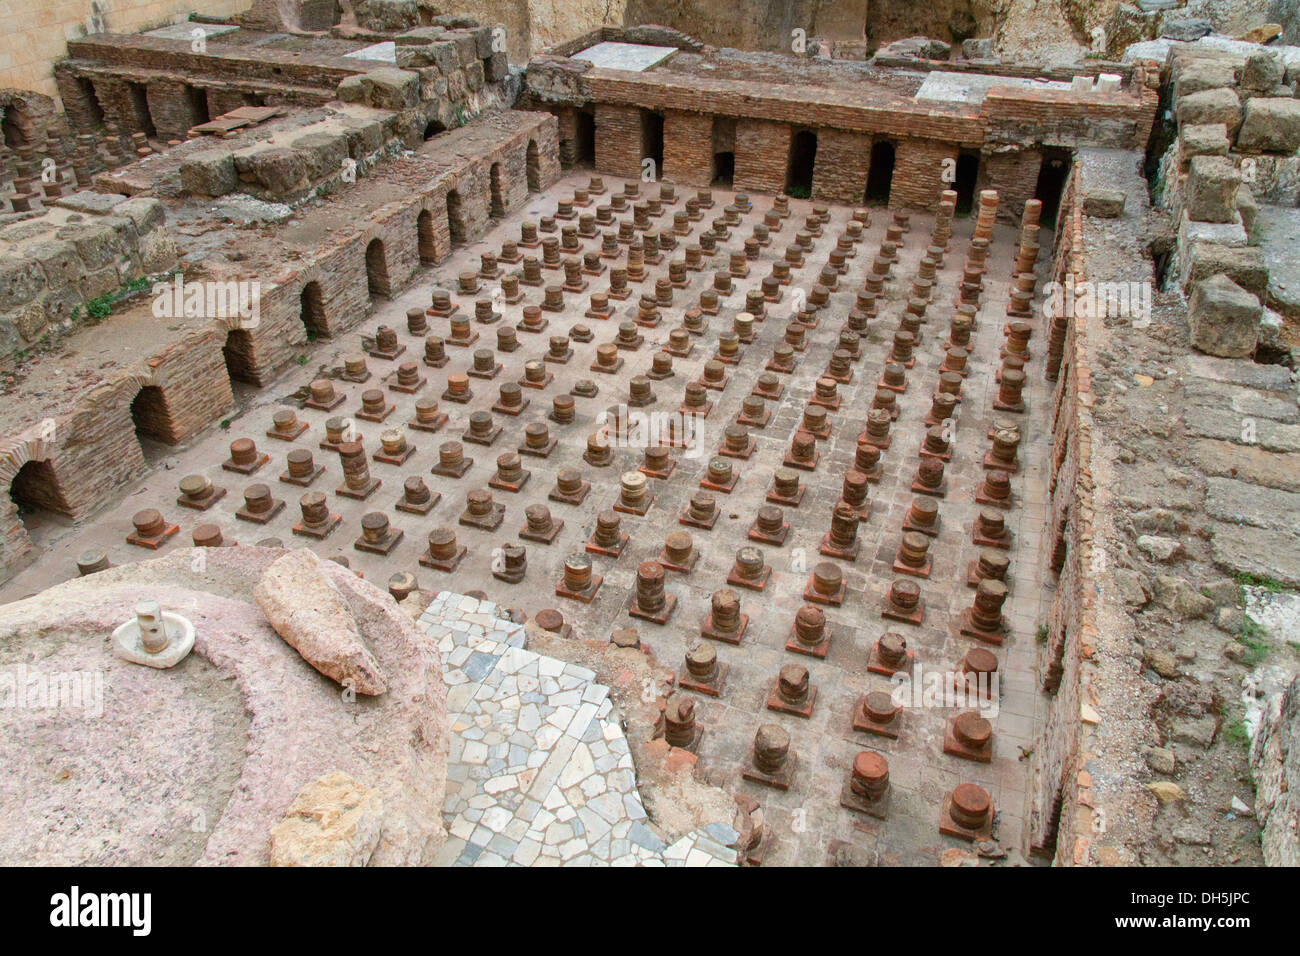 Foundations of the Roman baths, archaeological excavation site, Beirut, Lebanon Stock Photo